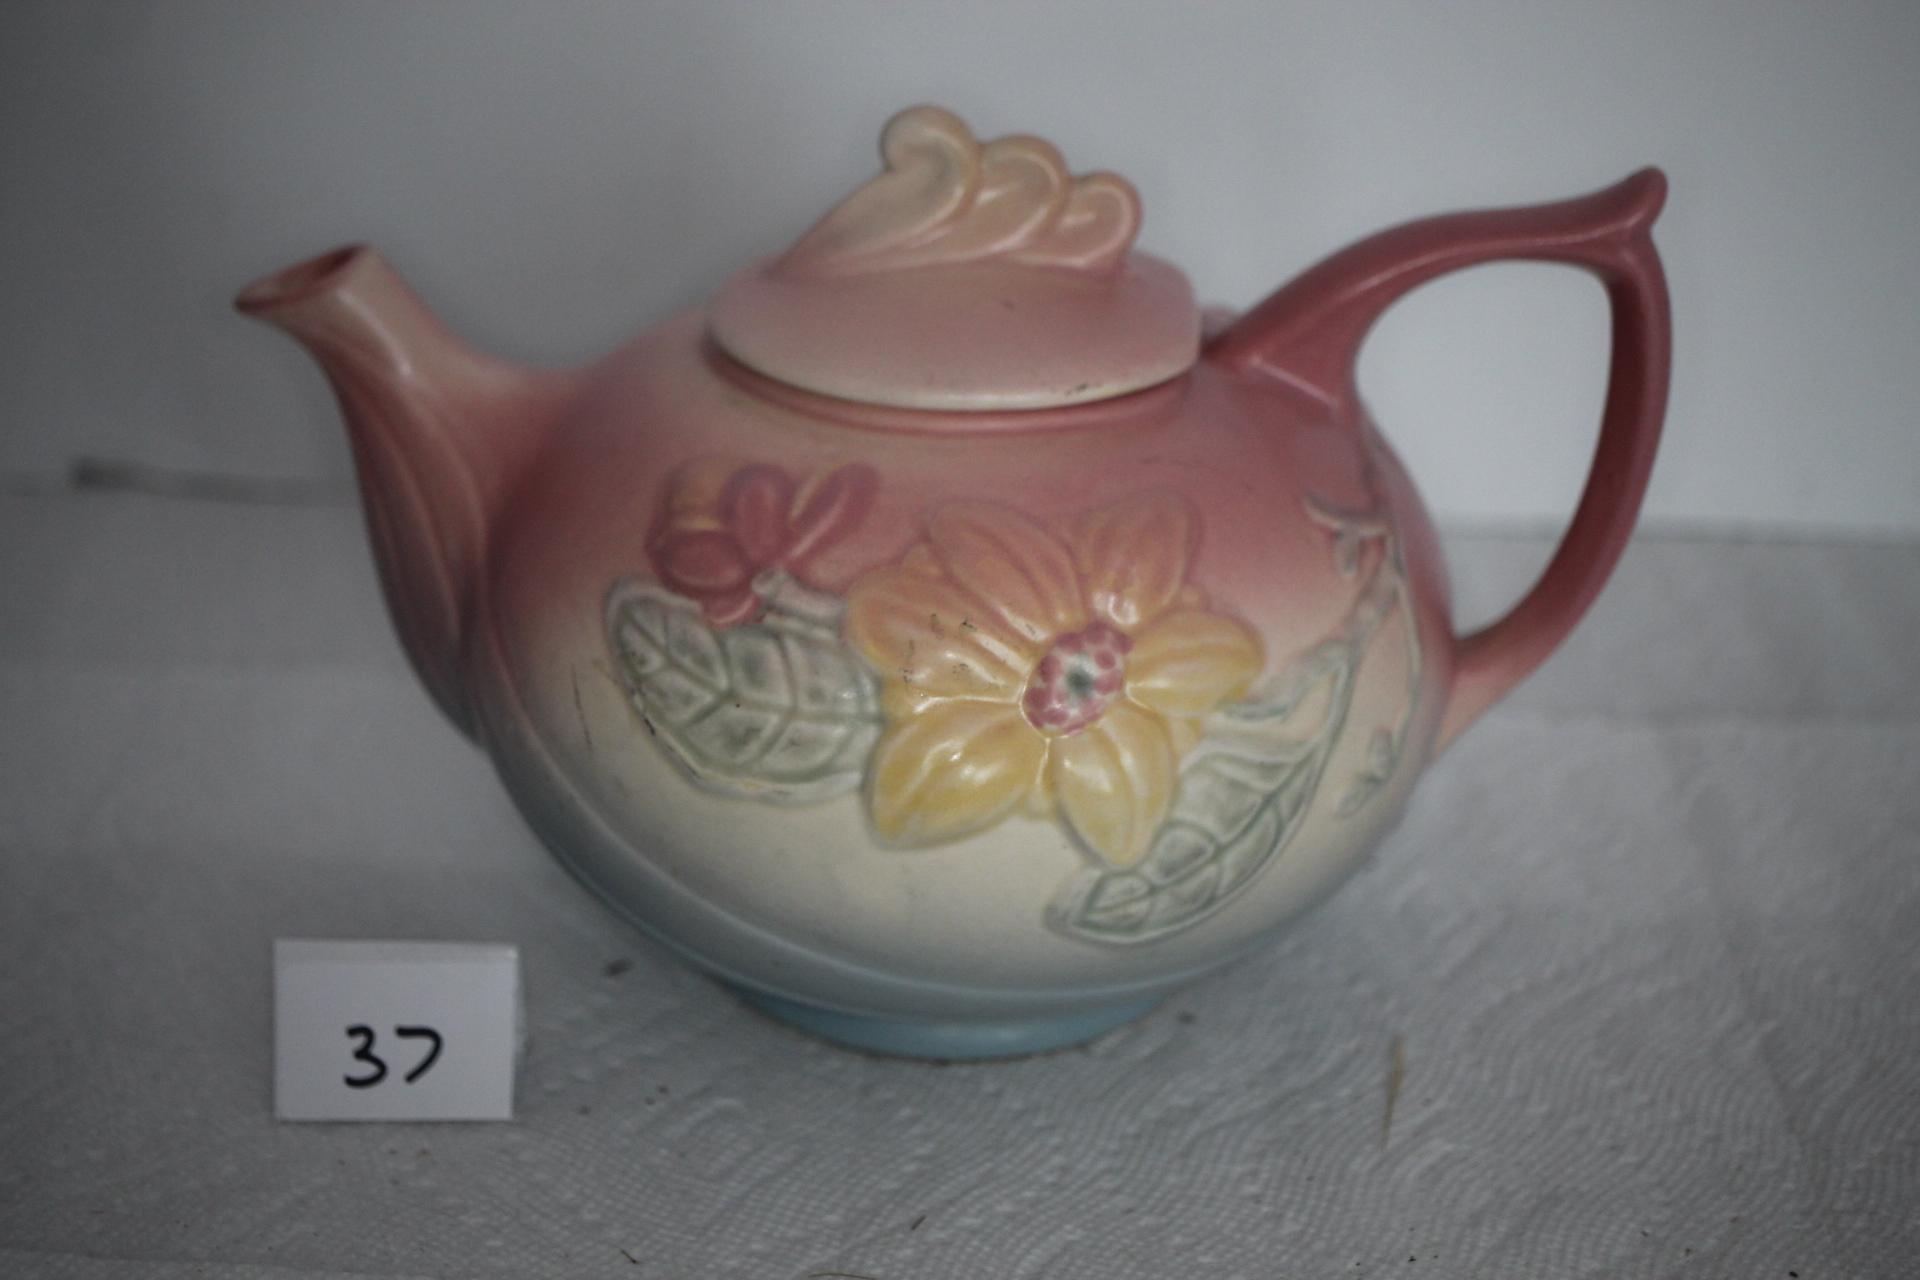 Hull Art Teapot w/Lid, USA, #23, 6 1/2", Crack in lid, Scratches